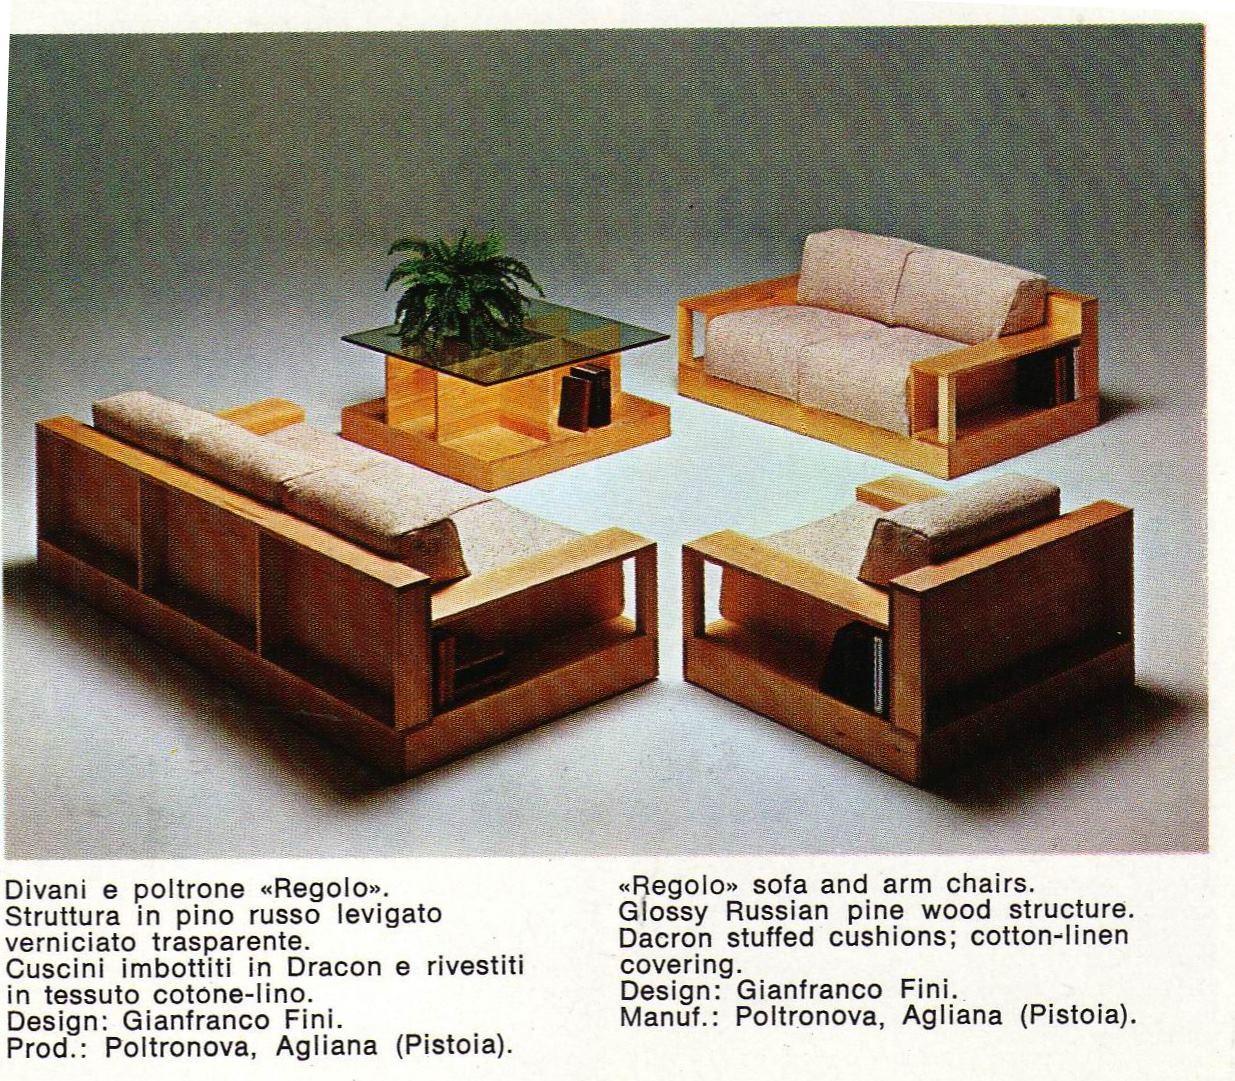 Fabulous and super rare pair of 'Regolo' solid pine wood lounge chairs with mohair upholstery complete with matching 'regolo' pine wood coffee table designed by GianFranco Fini for Poltronova, Italy in 1974. One of the chairs still retains it's